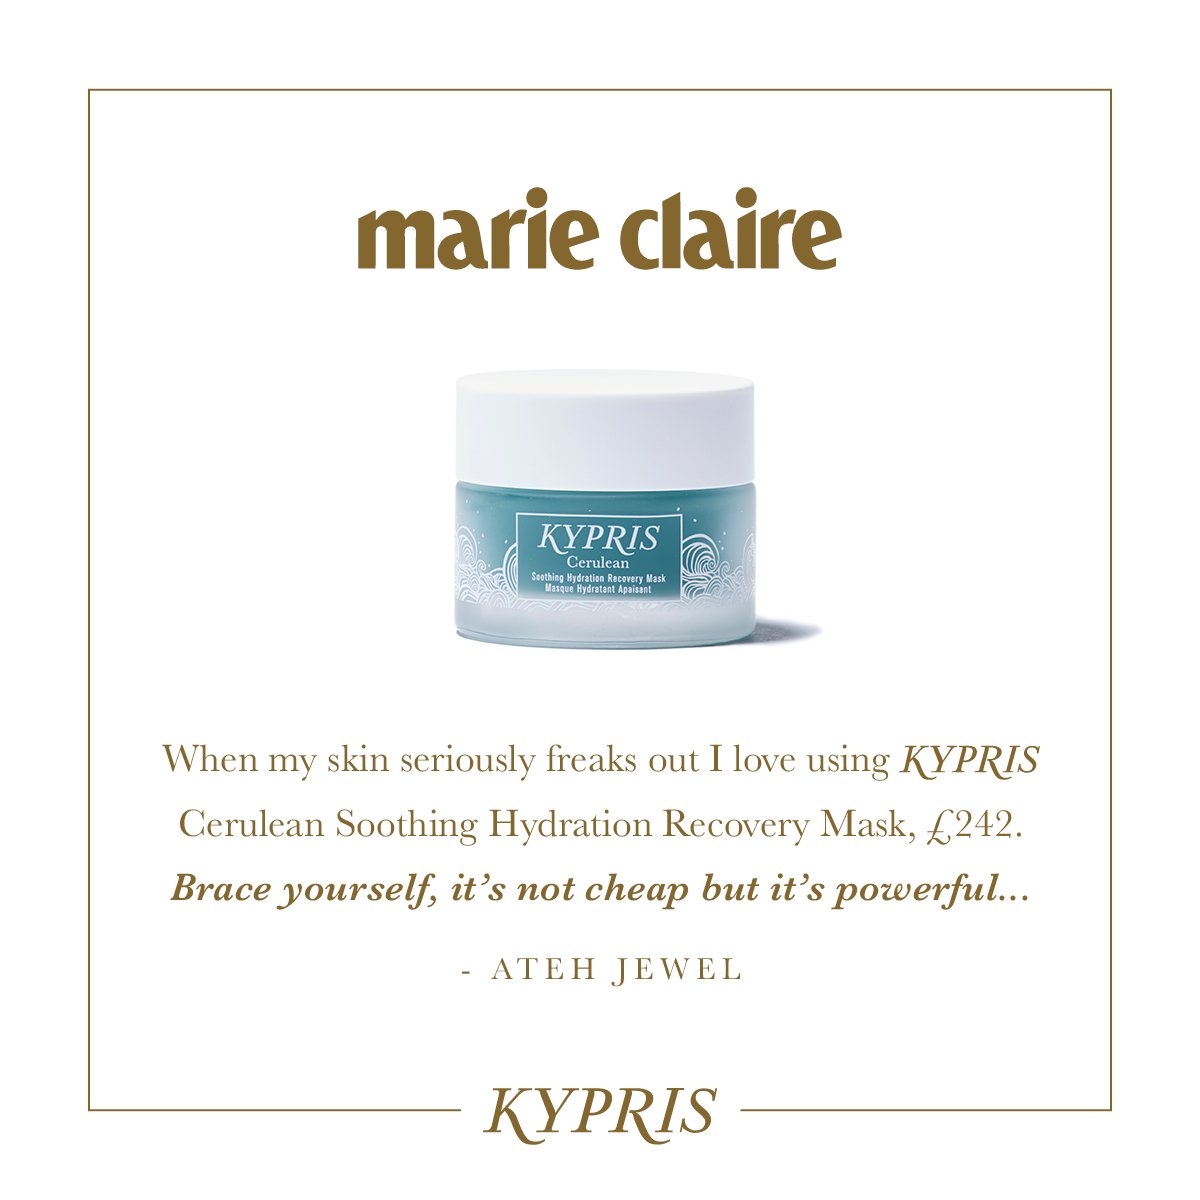 KYPRIS Beauty in the Press: Marie Claire Feature | Luxury, Organic Skincare